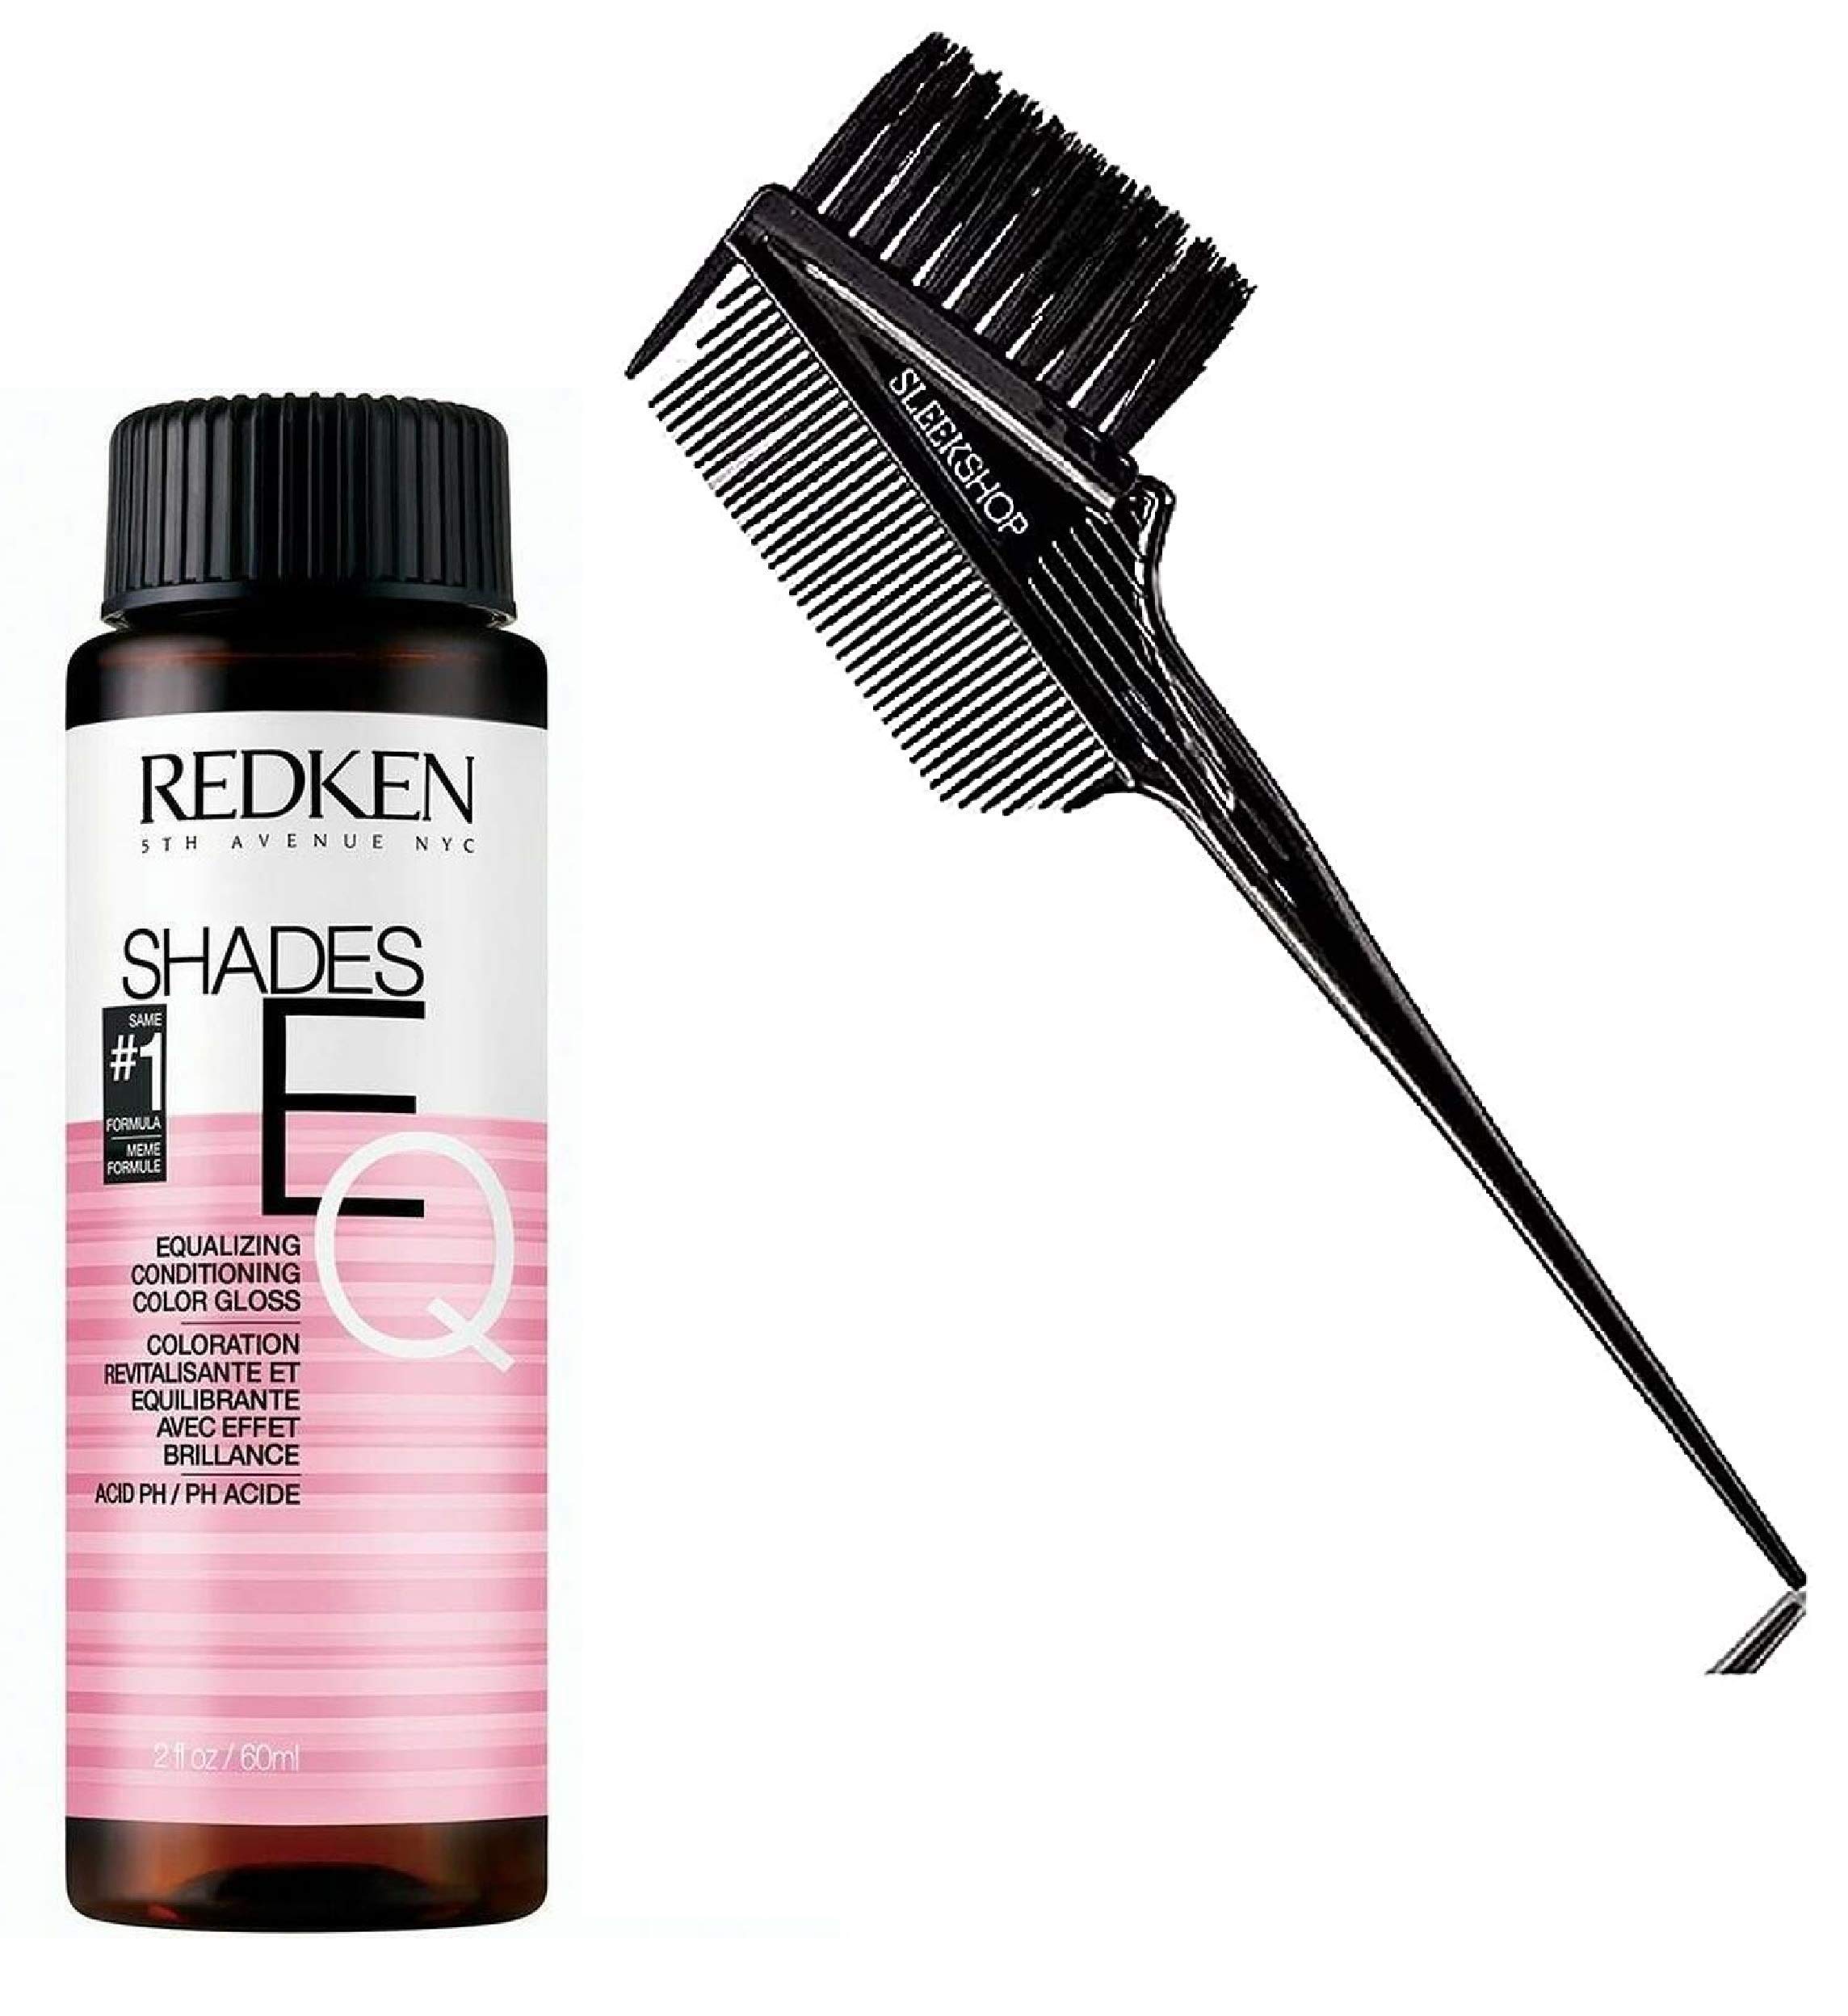 Pastel Aqua Blue : Redken SHADES EQ EquaIizing Conditioning Hair Color Gloss Demi-Permanent Haircolor Dye - Pack of 2 w/ Sleek 3-in-1 Brush Comb - image 1 of 1